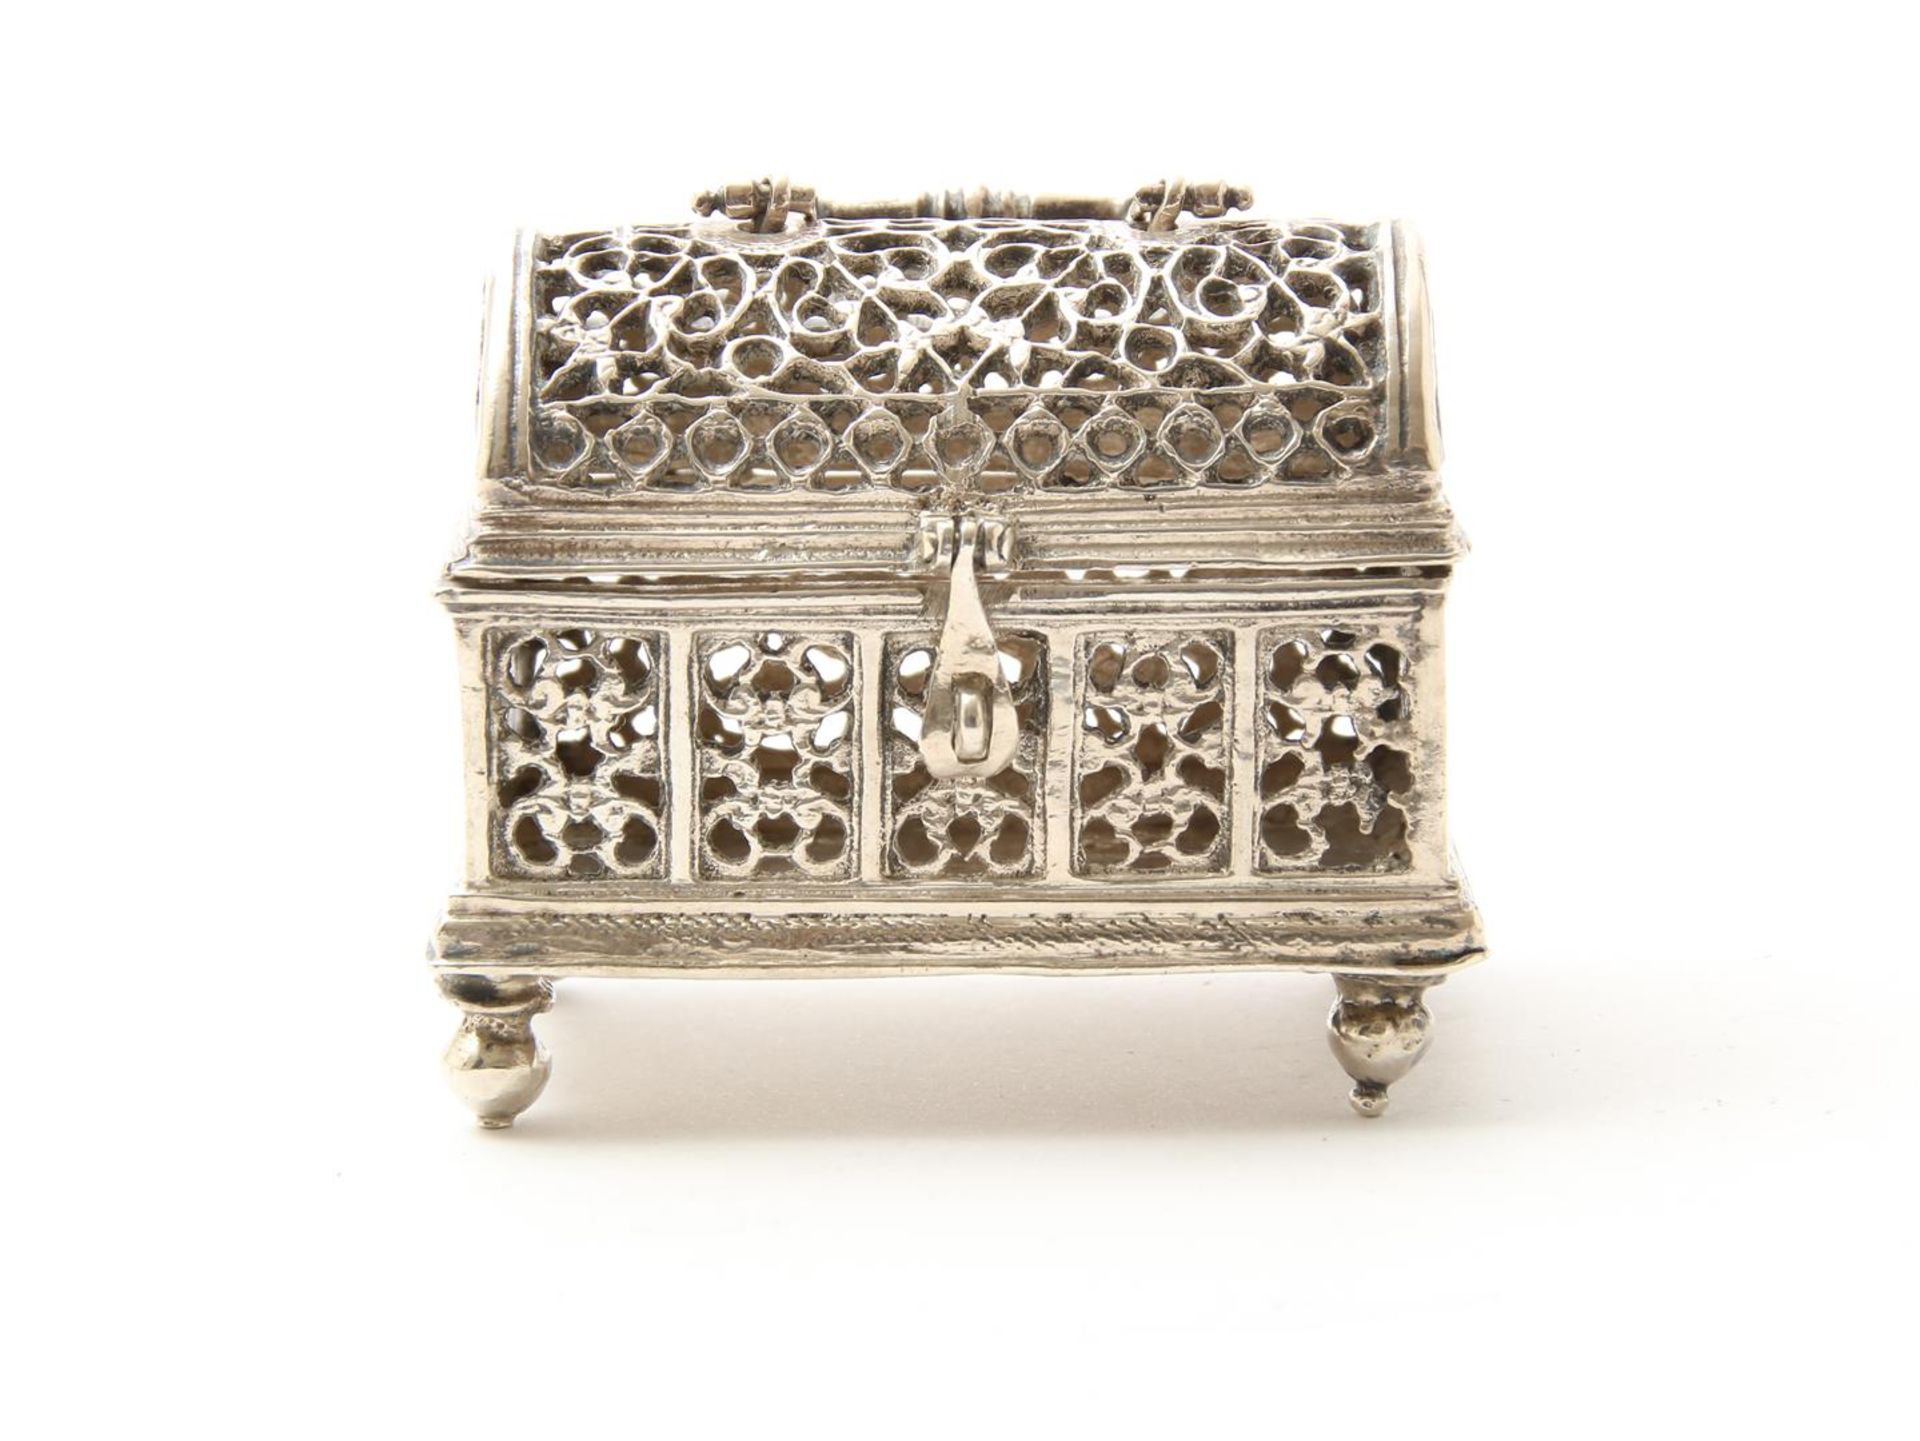 Small silver knotted box, openwork, Holland, late 17th century. with original initials.